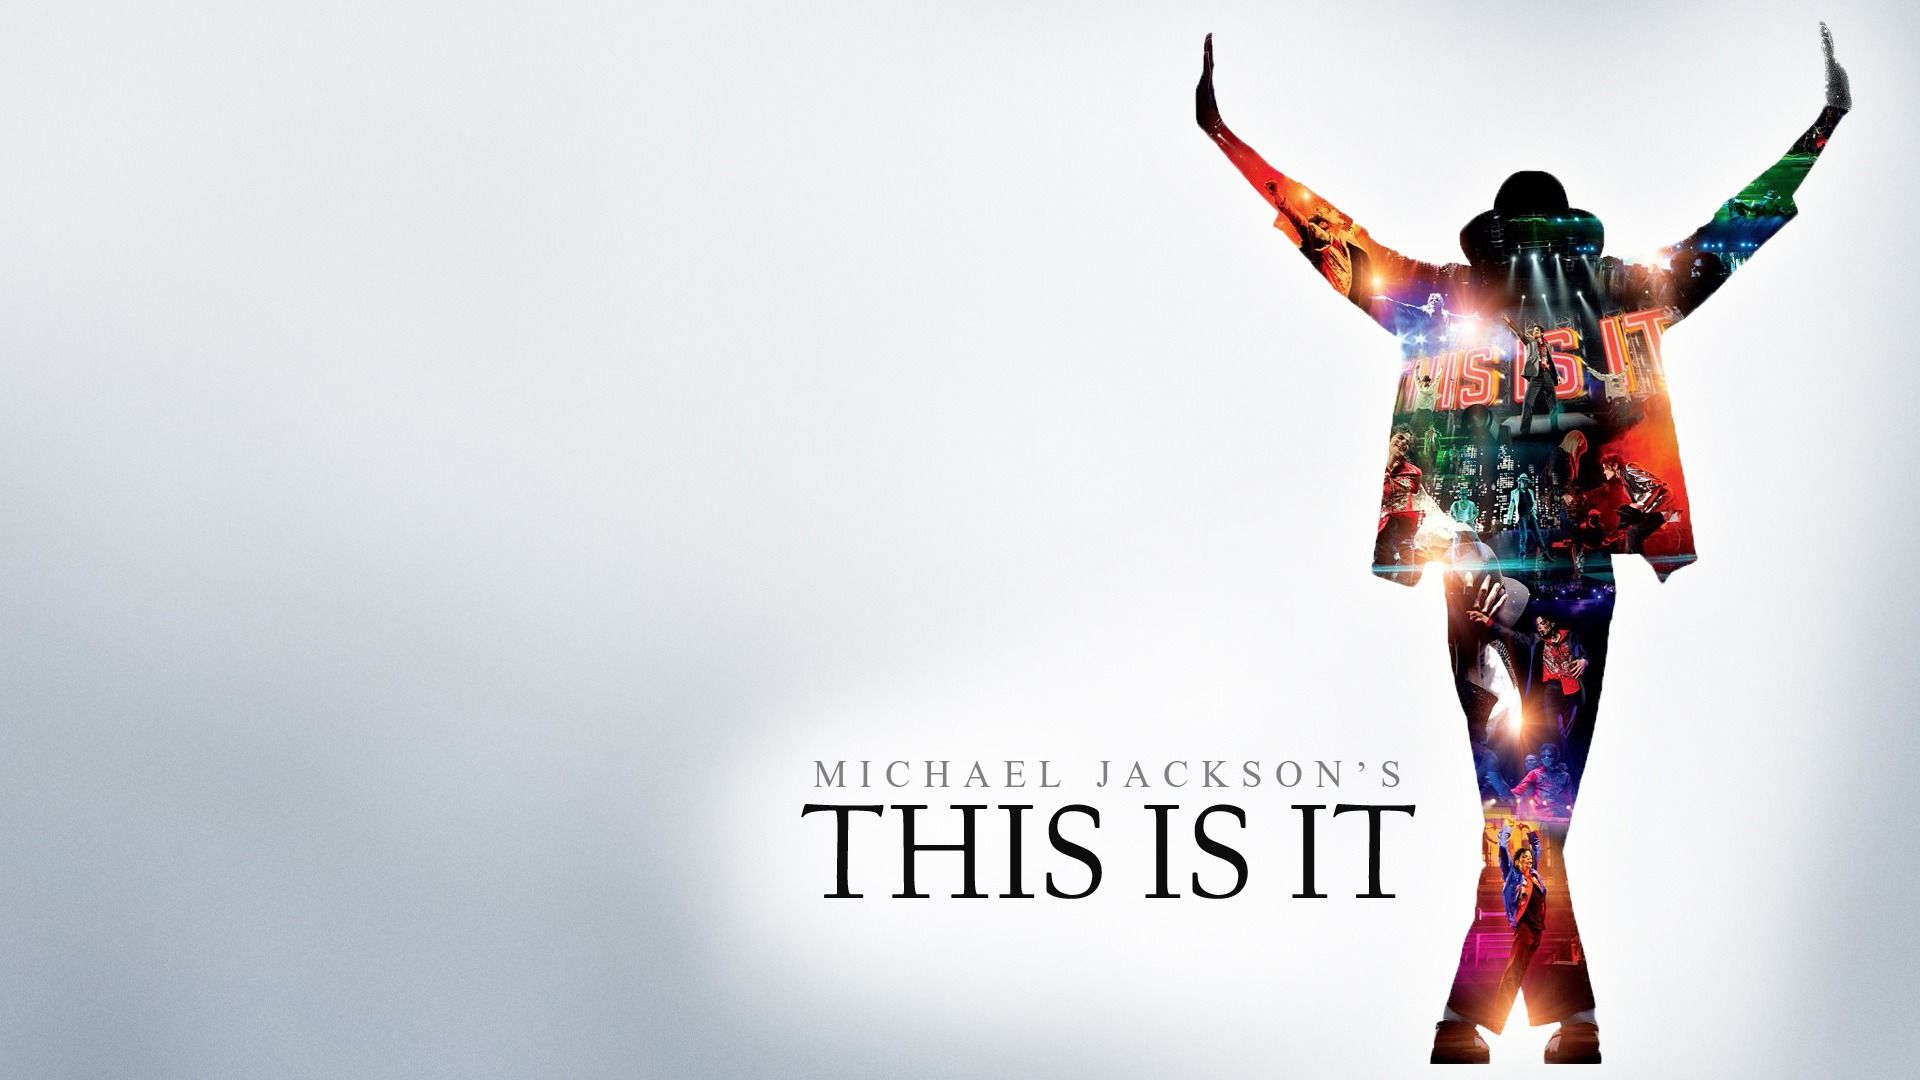 Free Download MJ Lovable images: michael jackson hd wallpapers free download